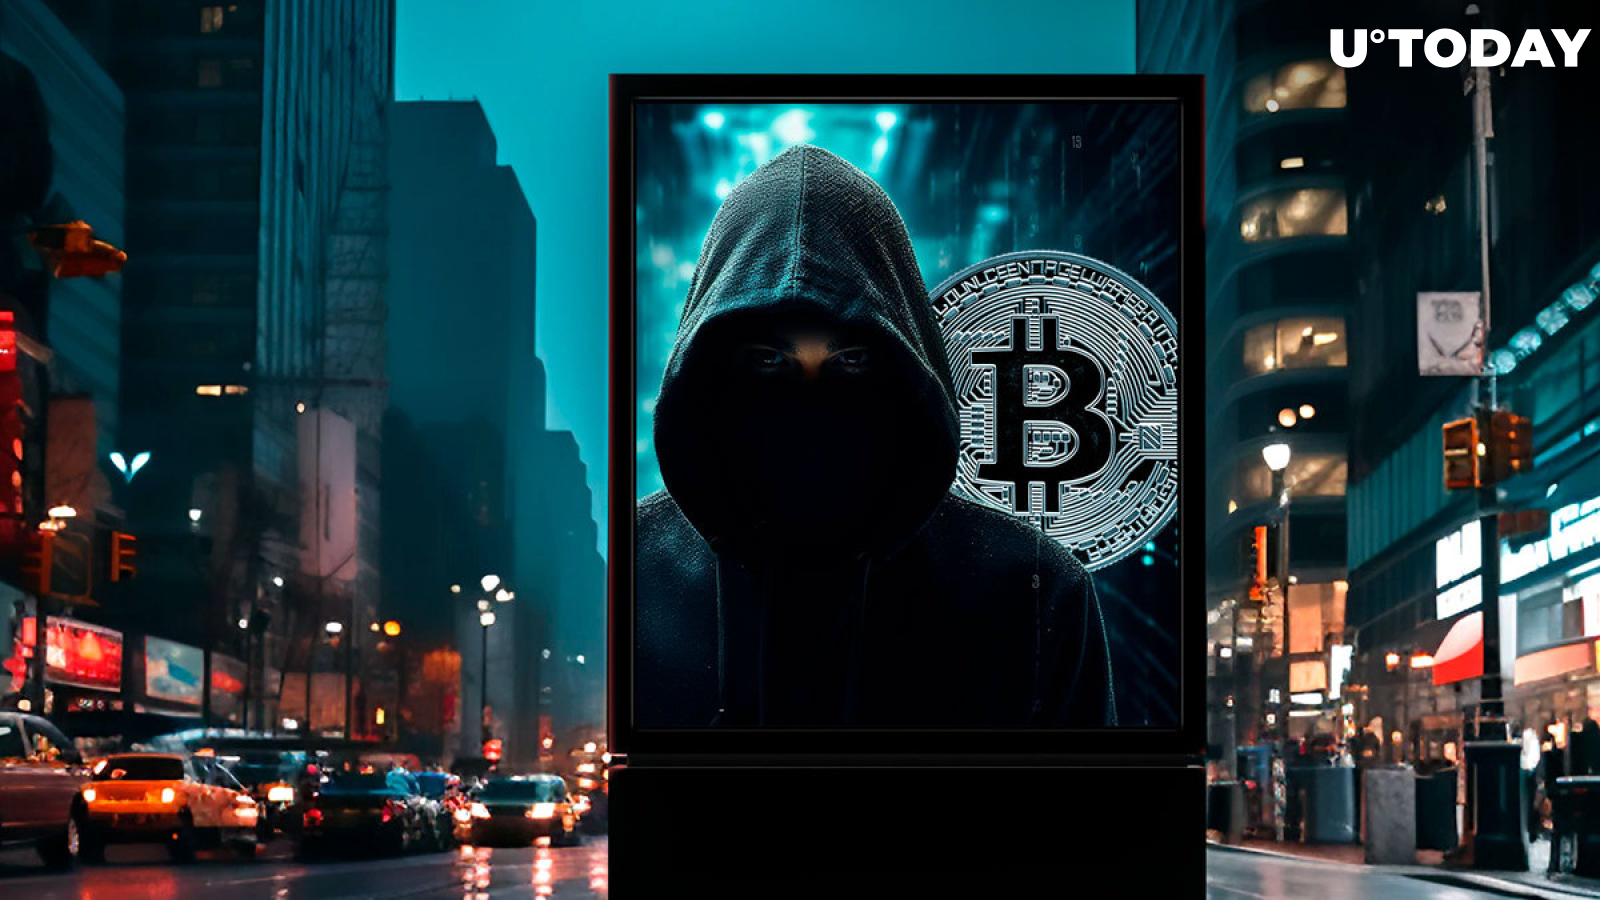 Satoshi Nakamoto 'Appears' on Times Square in New York City